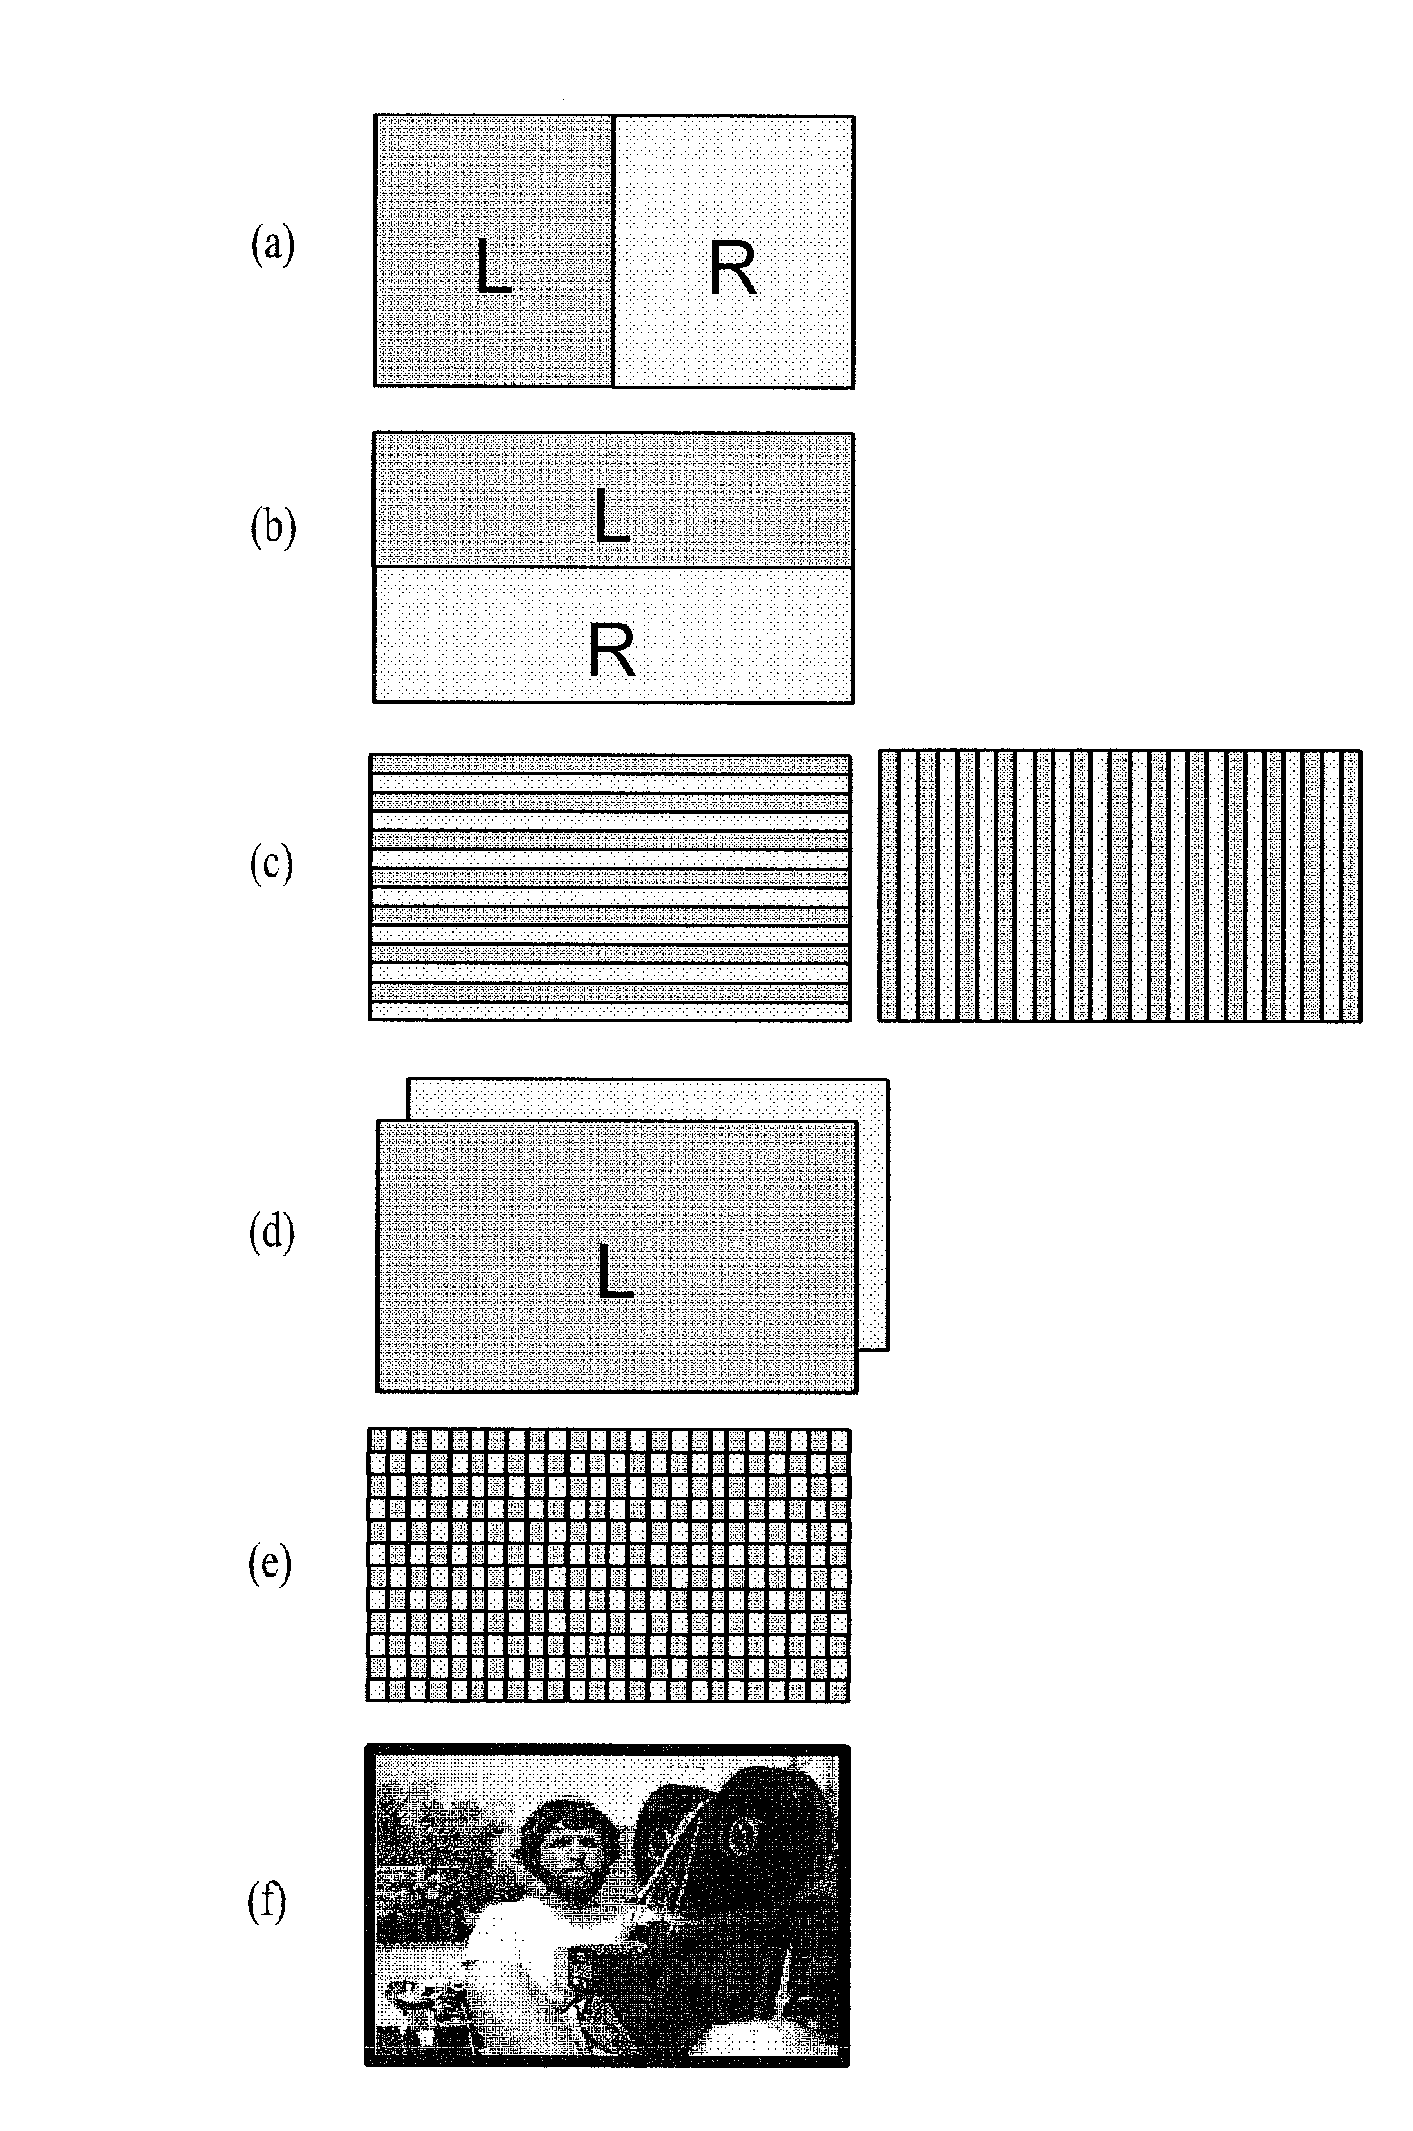 Method of displaying three-dimensional image data and an apparatus of processing three-dimensional image data